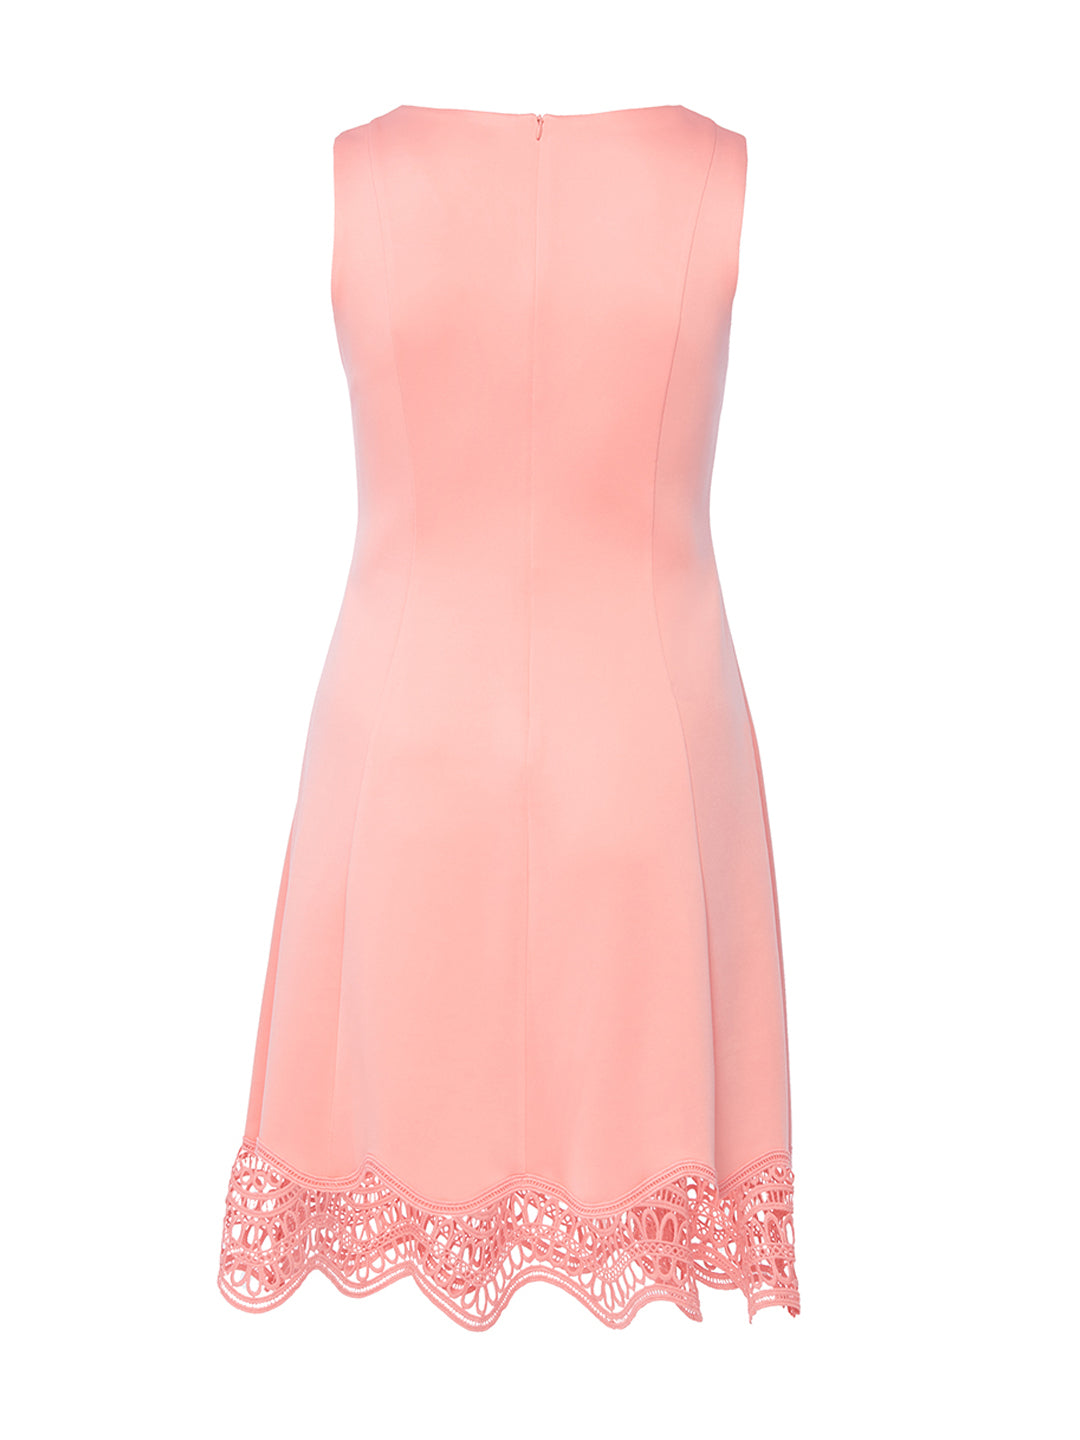 light pink fit and flare dress